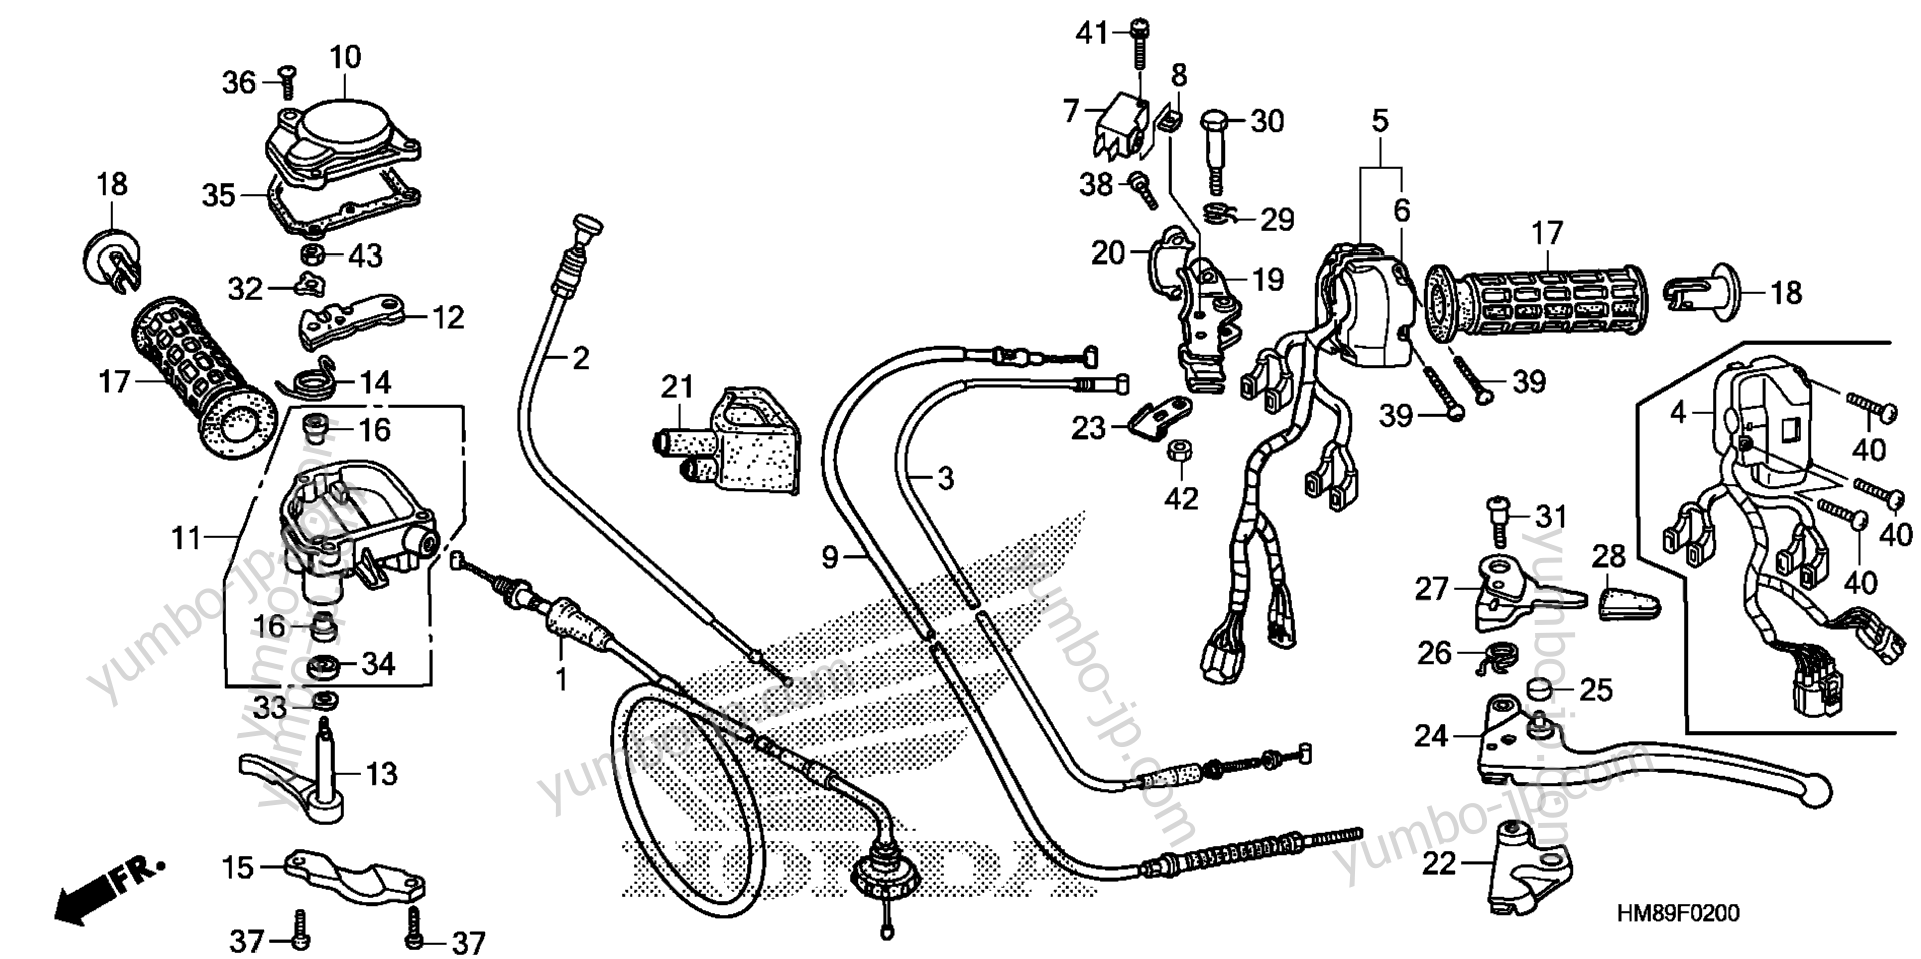 HANDLE LEVER / SWITCH / CABLE for ATVs HONDA TRX250TM A 2011 year